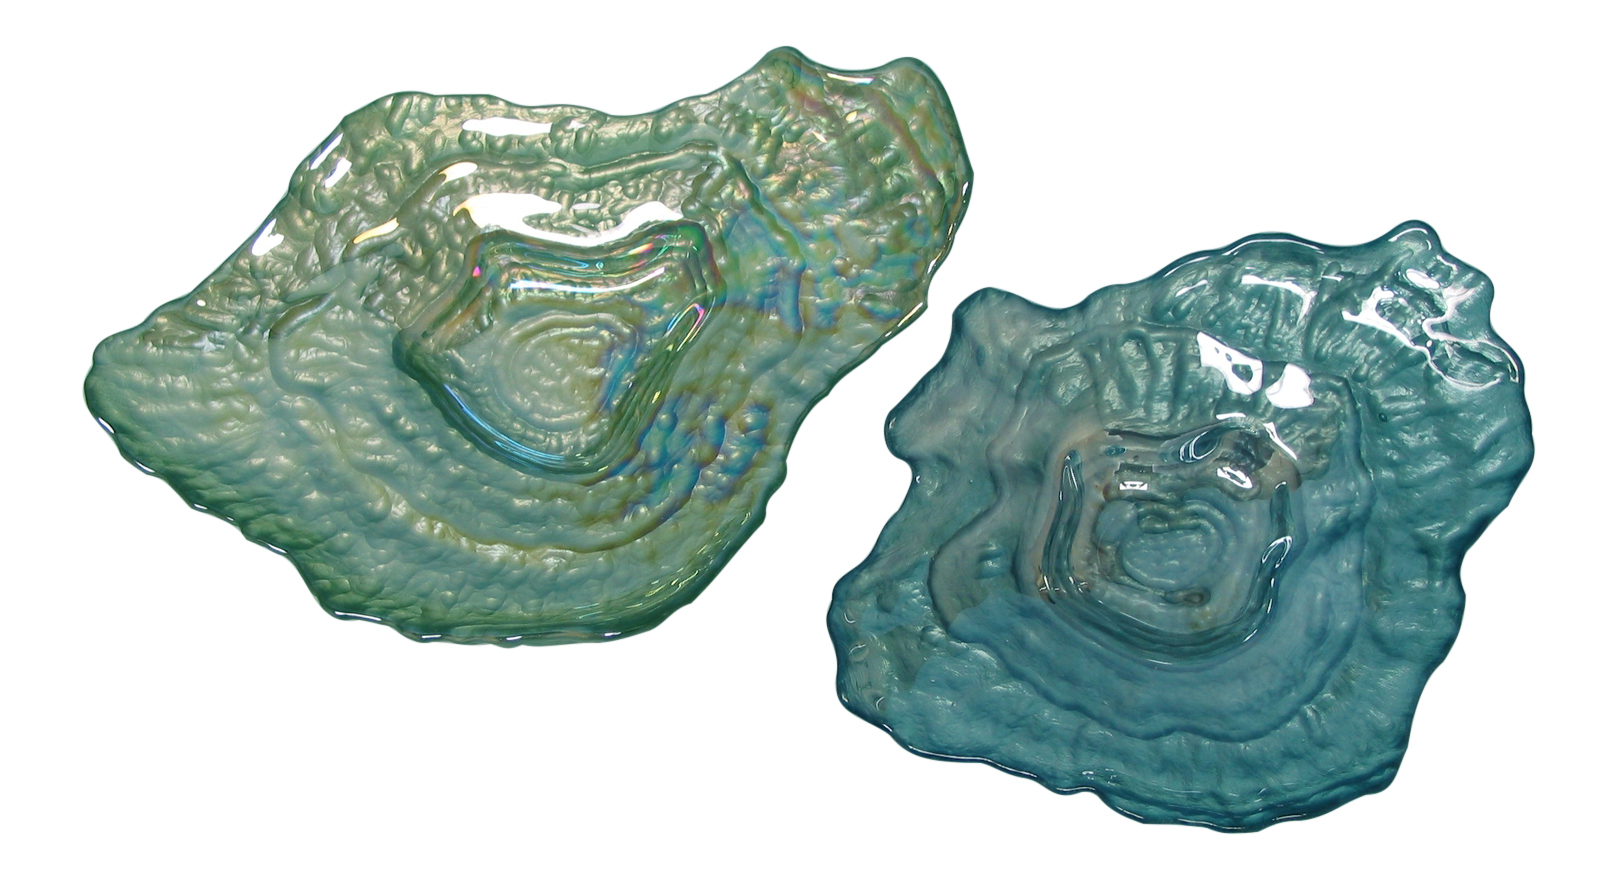 Beachcombers Glass Blue and Green Oyster Shell Shaped Dishes Set of 2 Coastal Tableware